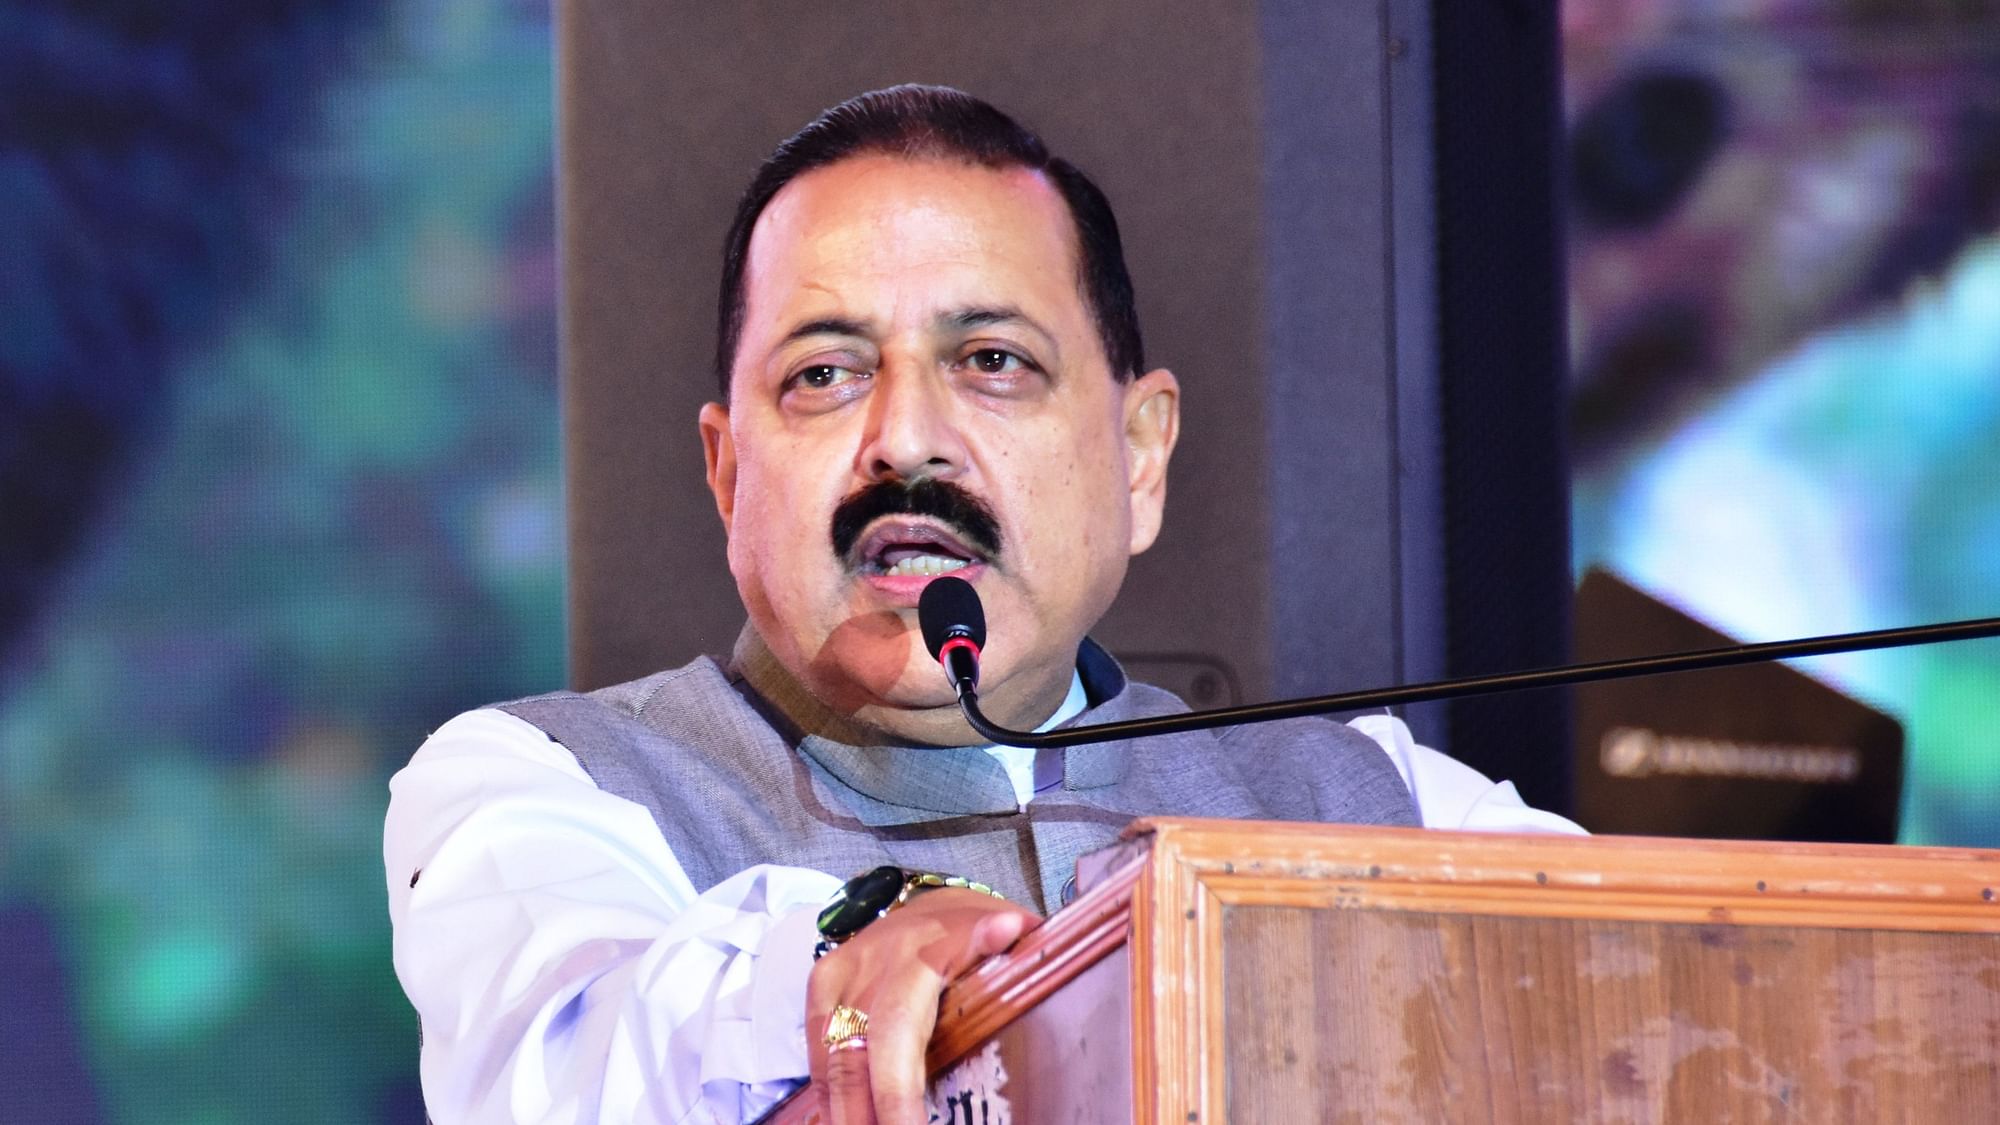 Minister of State for Personnel Jitendra Singh, in a written reply to the Lok Sabha, said that no proposal has been put forth to reduce the retirement age of employees.